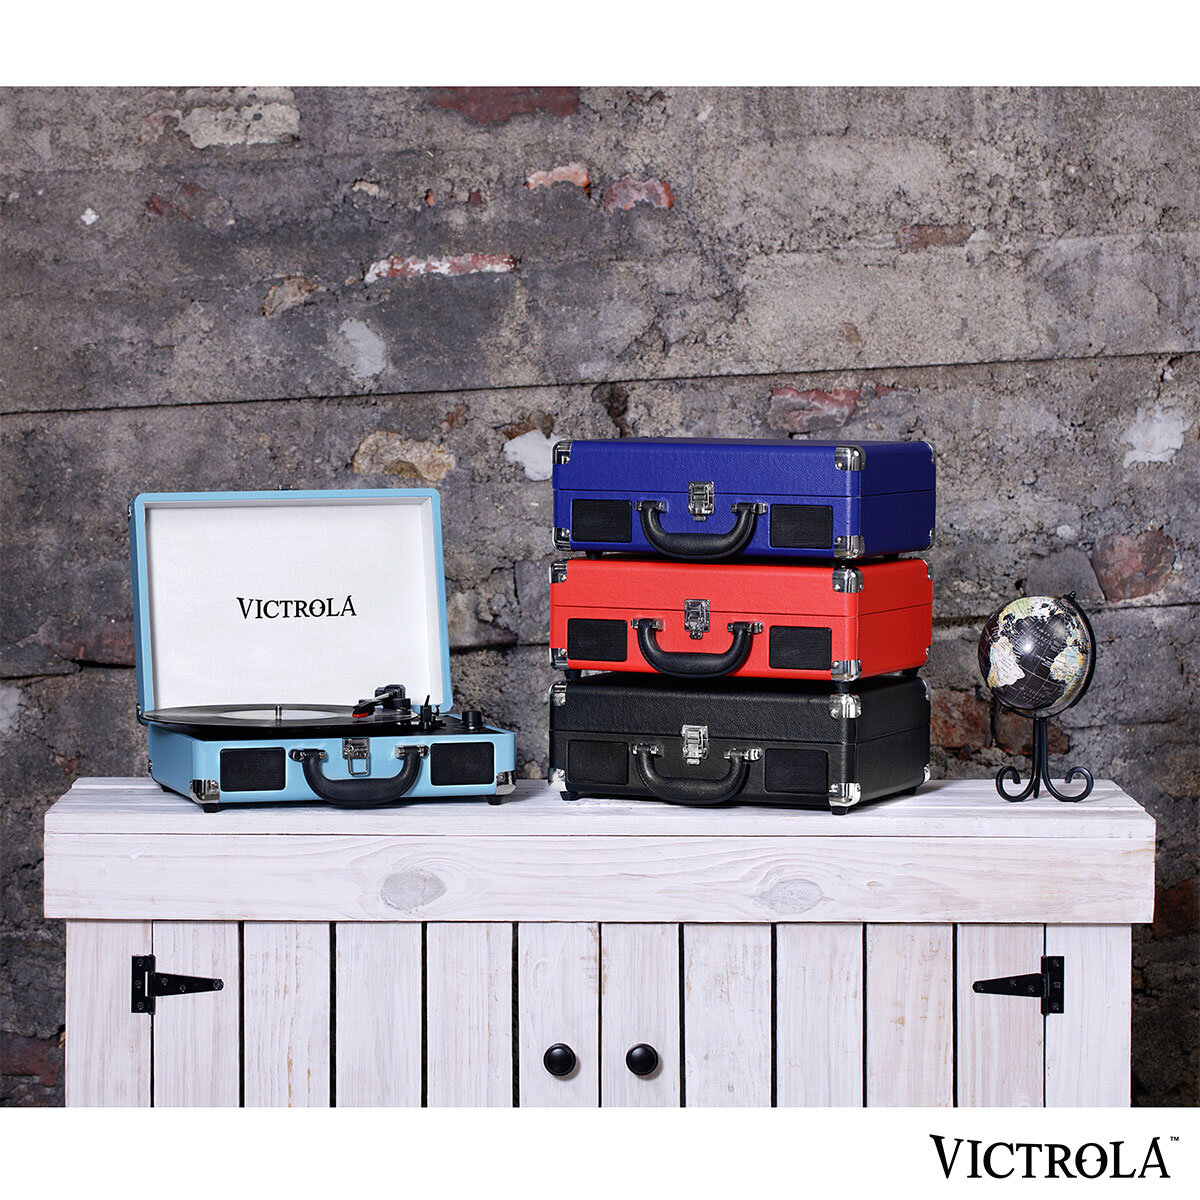 Victrola Journey VSC-550BT, Record Player with 3 Speeds, Bluetooth in 4 Colours